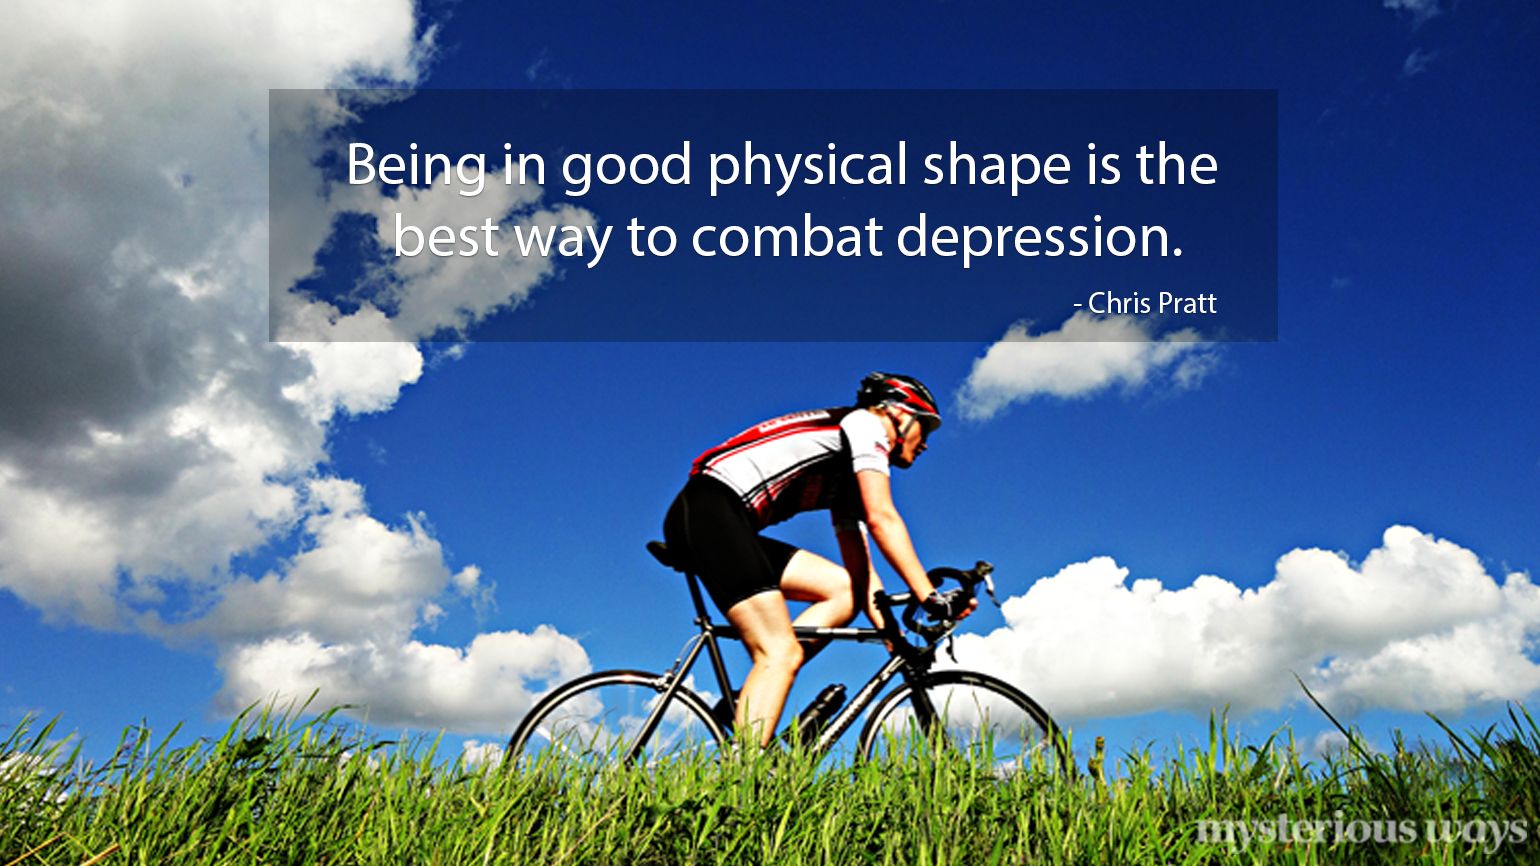 Being in good physical shape is the best way to combat depression —Chris Pratt